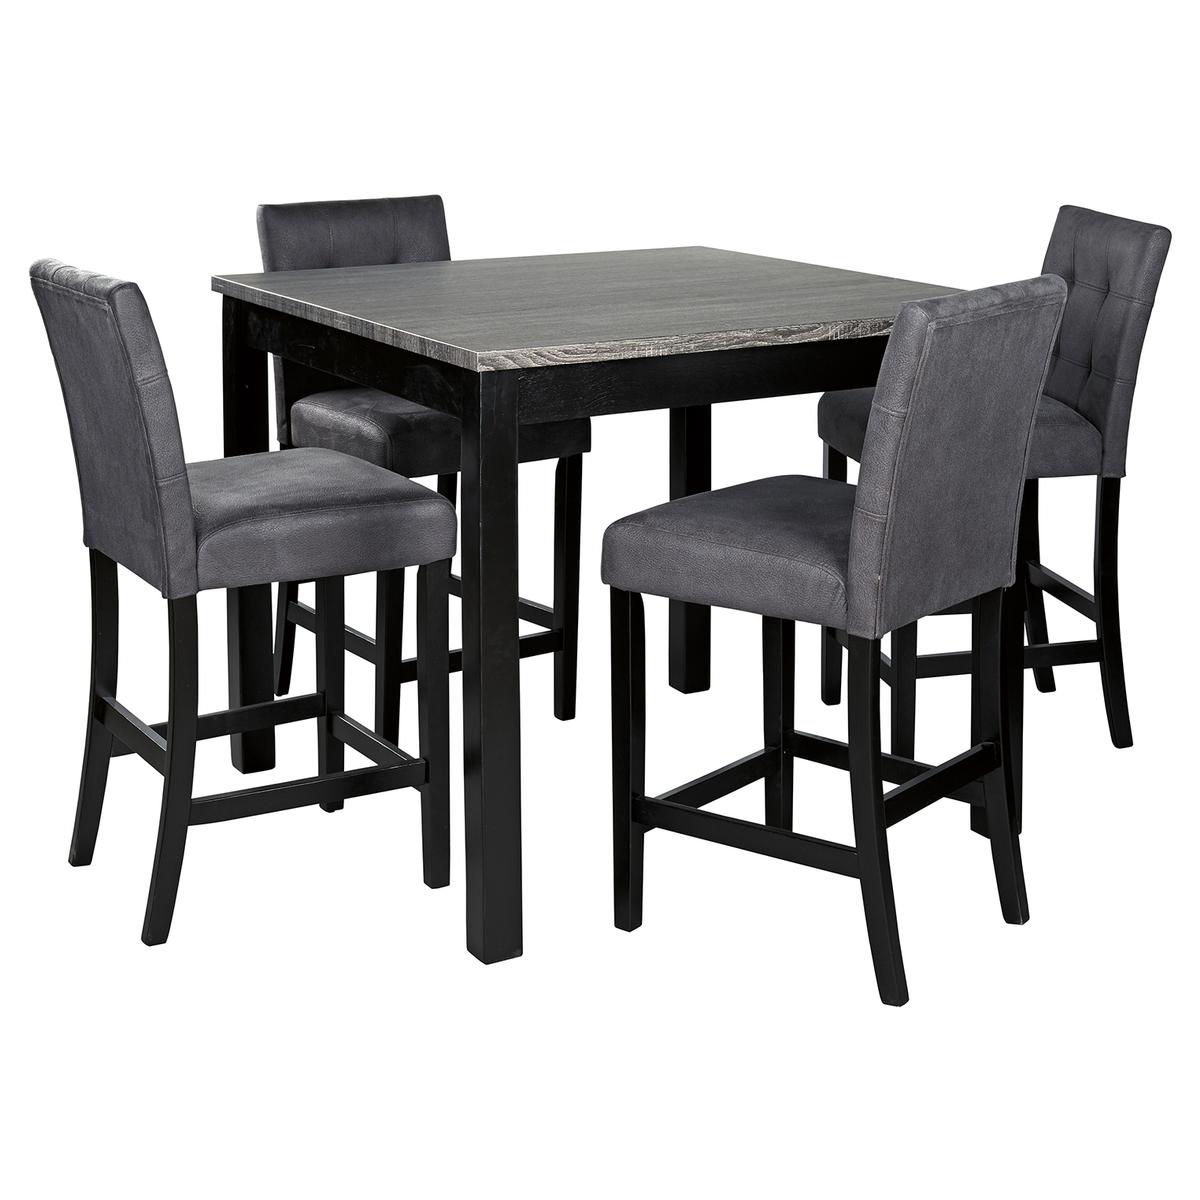 Ashley Garvine Counter Height Dining Table & 4 Bar Stools (5 Piece Set)